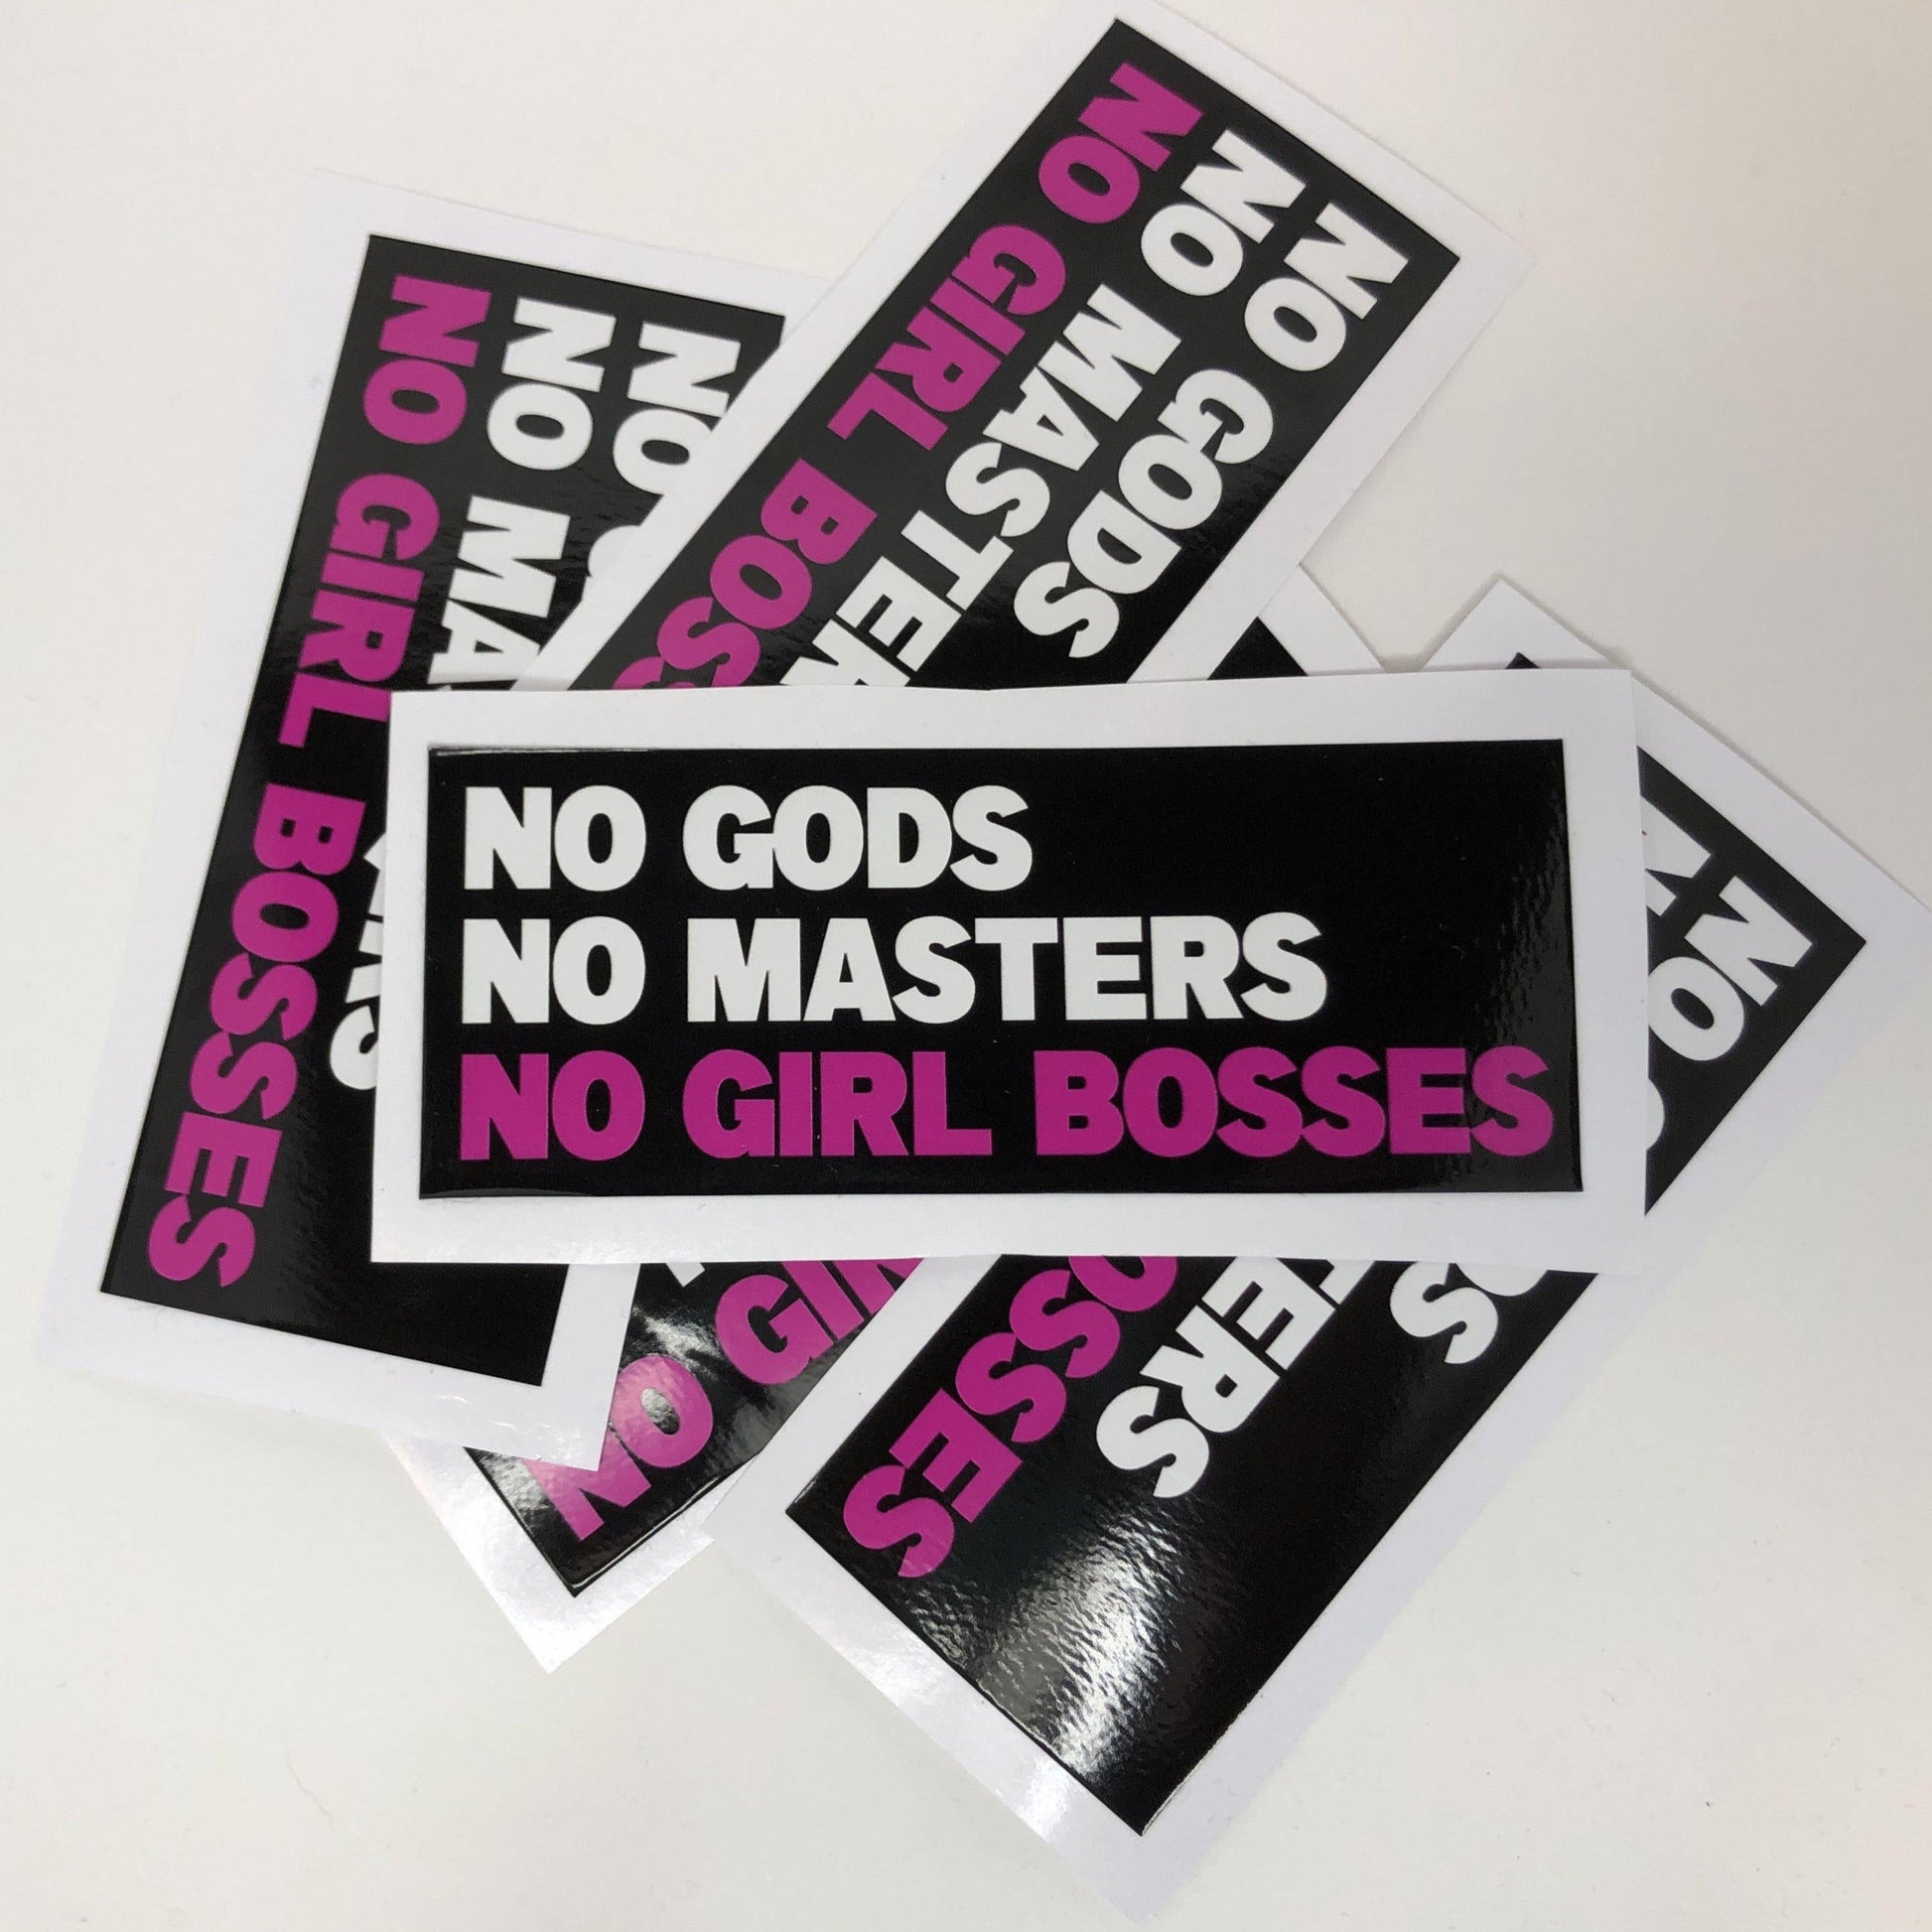 A black rectangle vinyl sticker with the words "no gods no masters" in white and "no girl bosses" in pink